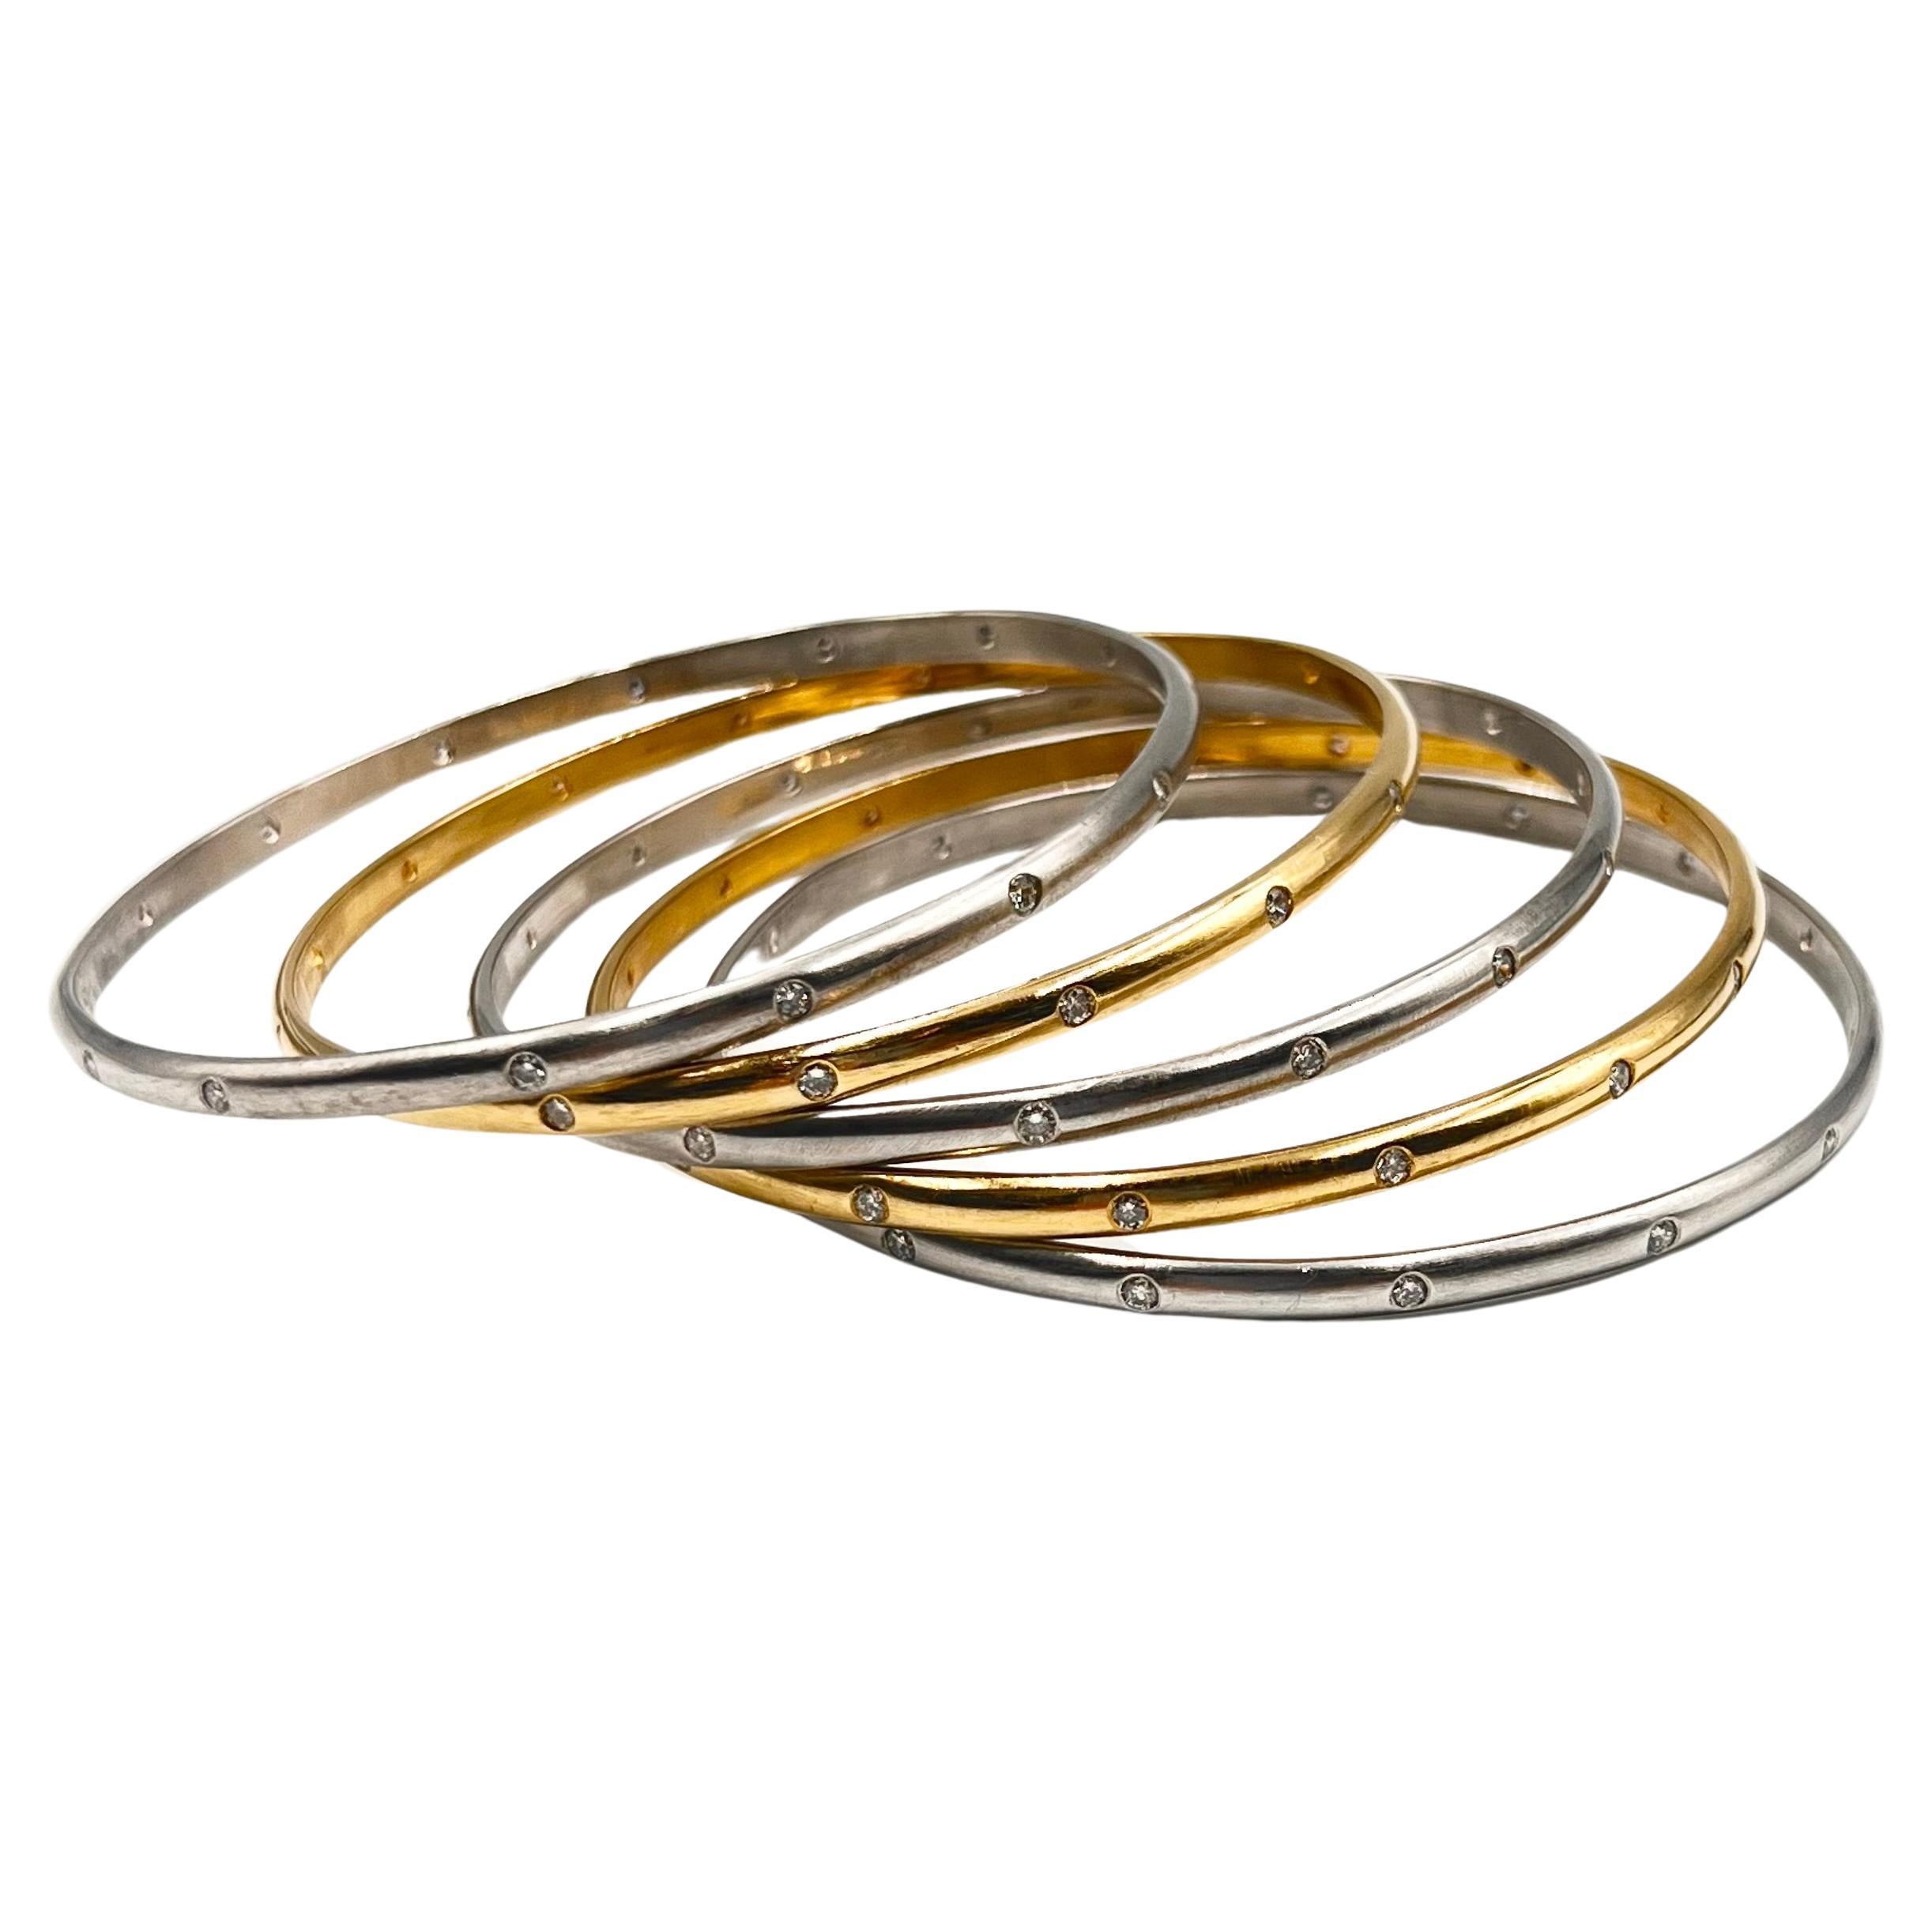 Five bangle bracelet set in polished 18k yellow gold and 14k white gold accented by round brilliant-cut diamonds. Two bracelets are in 18k yellow gold and three are in 14k white gold.  Each bracelet is bezel-set with fifteen round brilliant-cut